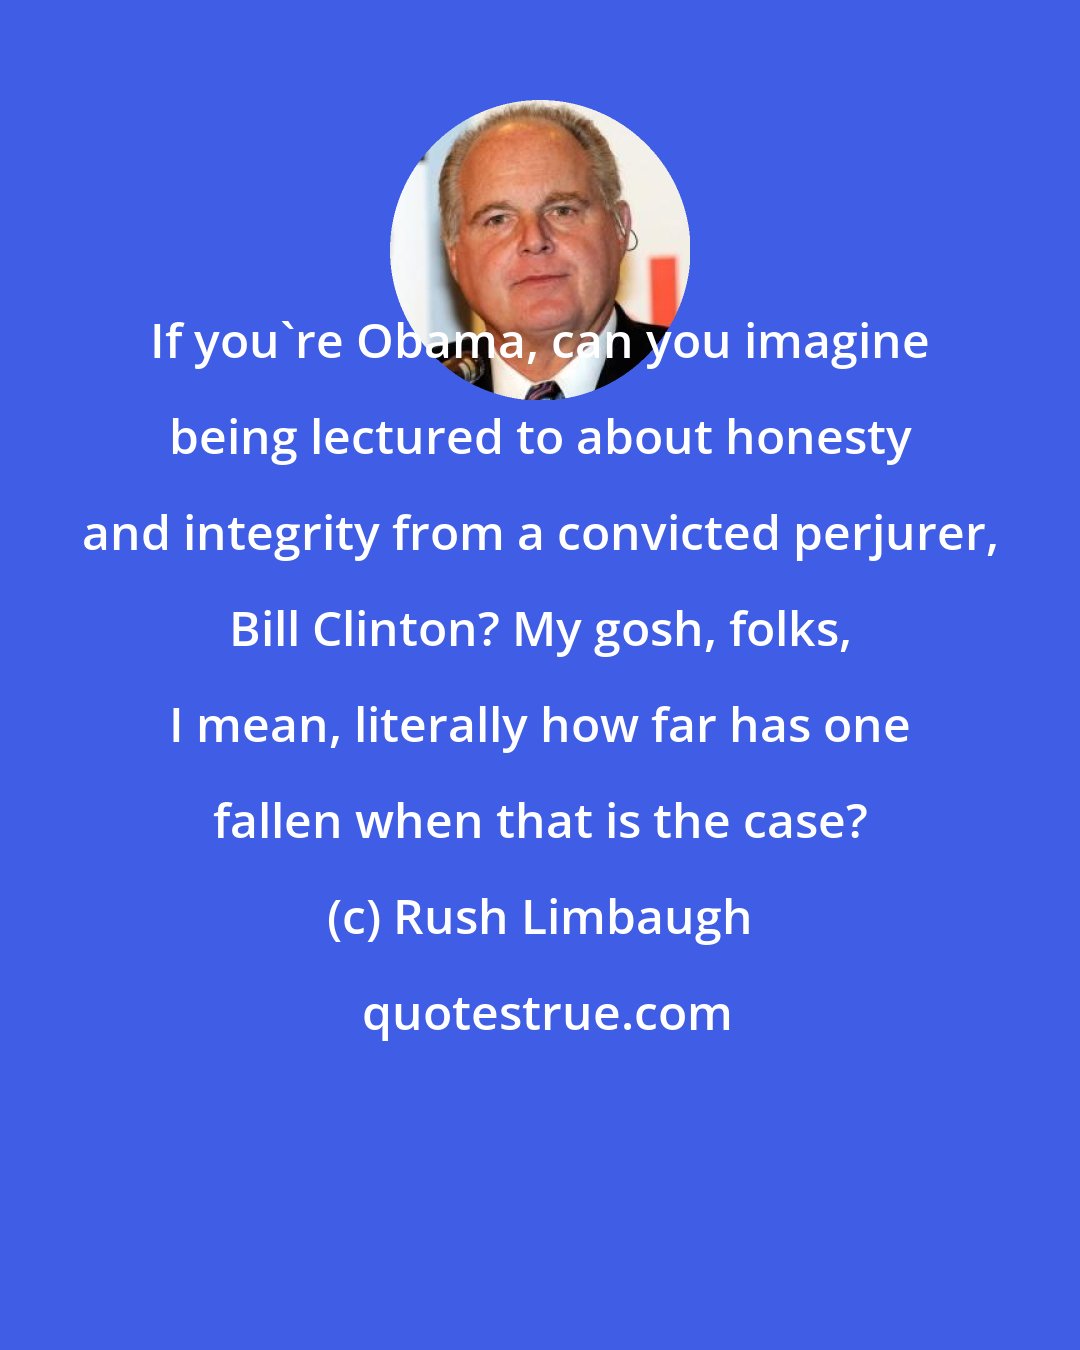 Rush Limbaugh: If you're Obama, can you imagine being lectured to about honesty and integrity from a convicted perjurer, Bill Clinton? My gosh, folks, I mean, literally how far has one fallen when that is the case?